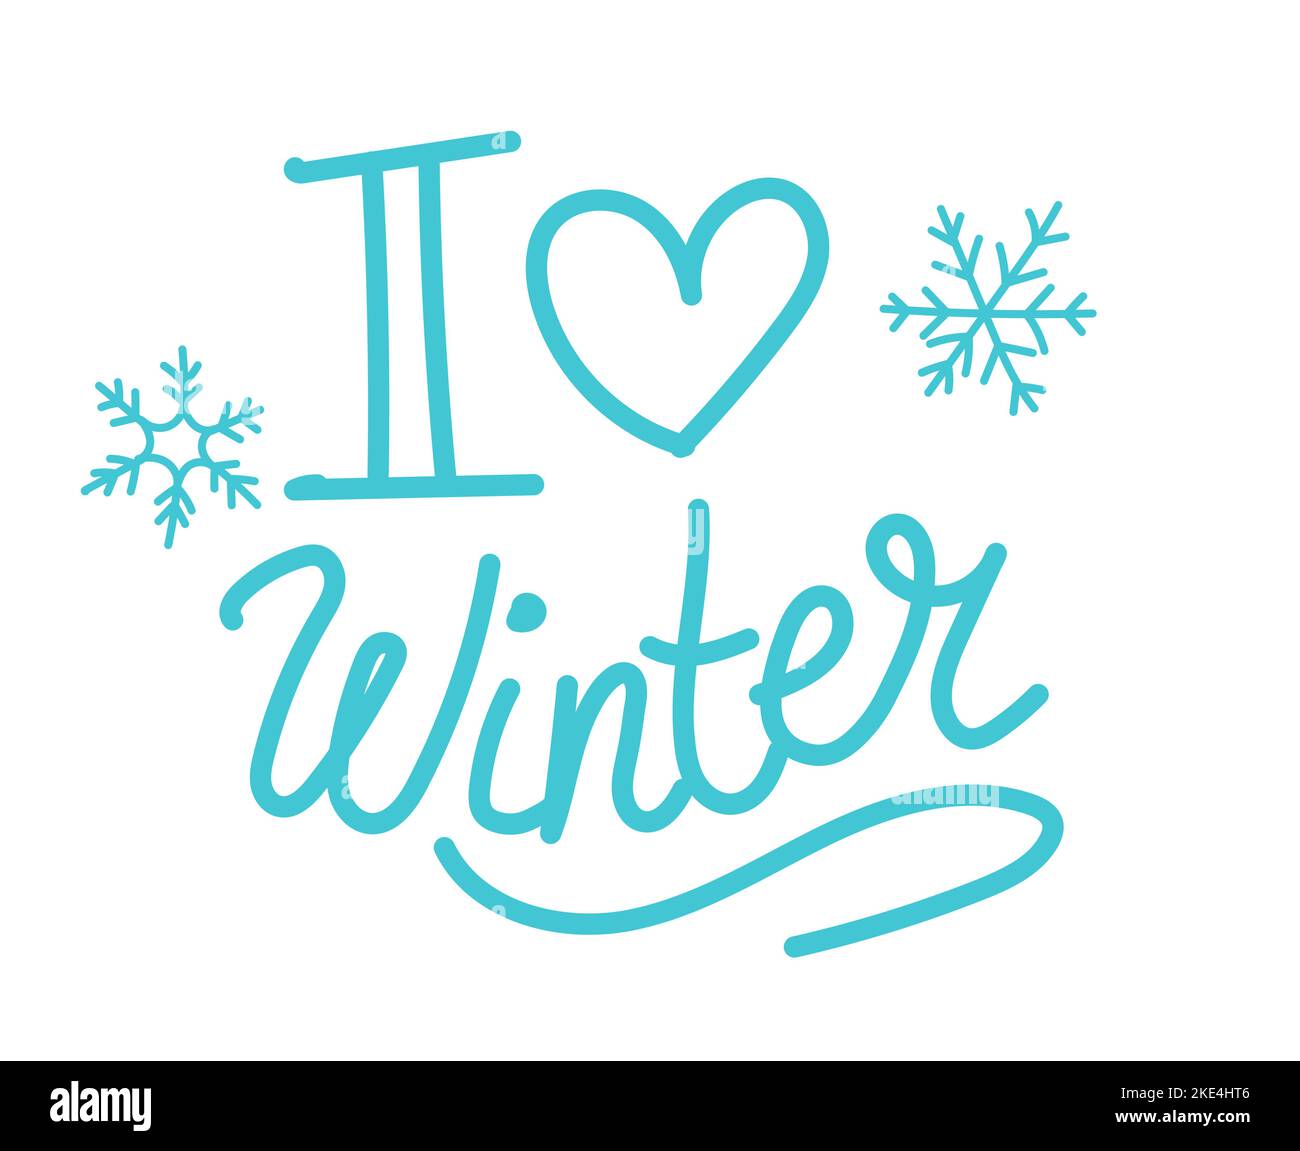 I love winter lettering. Winter logo and emblem for invitation, greeting card, t-shirt, prints and posters. Hand drawn winter inspiration phrase. Vector illustration Stock Vector